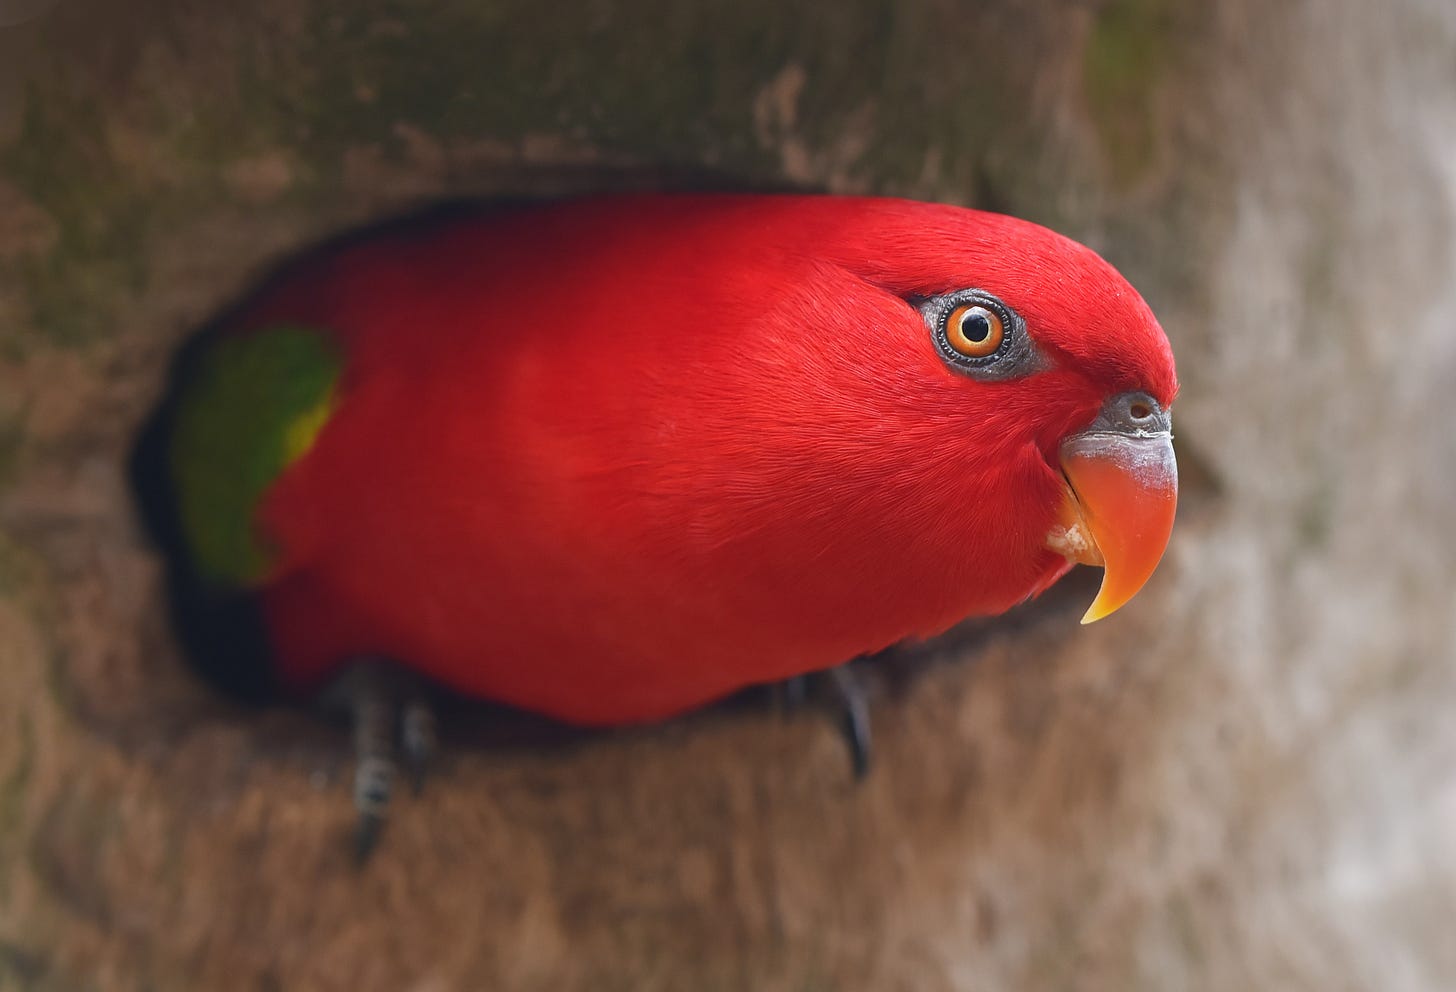 A bright red chattering lorikeet parrot peeking out of a nest hole in a tree